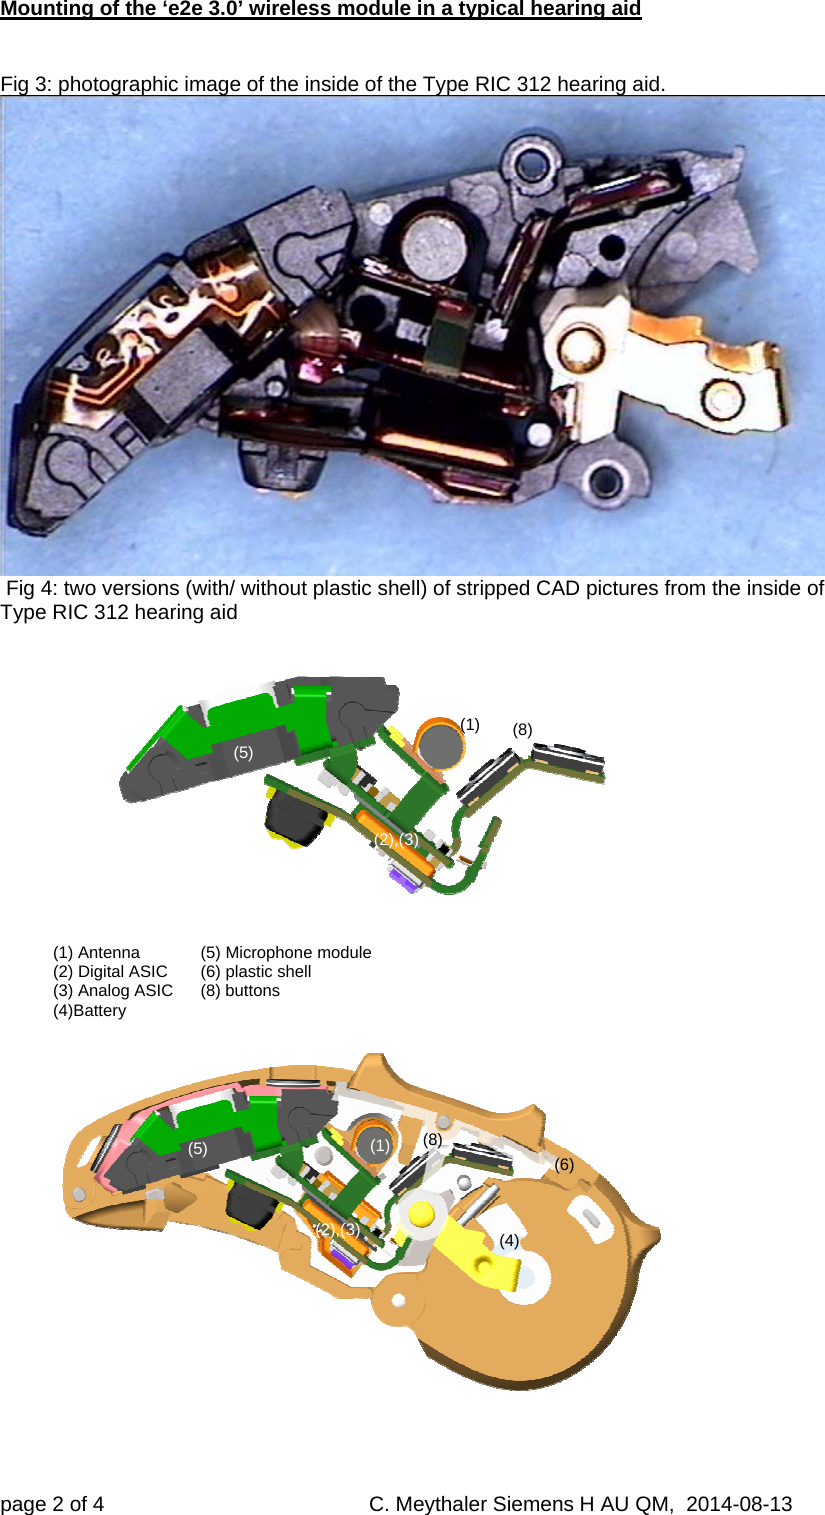 Mounting of the ‘e2e 3.0’ wireless module in a typical hearing aid page 2 of 4     C. Meythaler Siemens H AU QM,  2014-08-13    Fig 3: photographic image of the inside of the Type RIC 312 hearing aid.   Fig 4: two versions (with/ without plastic shell) of stripped CAD pictures from the inside of Type RIC 312 hearing aid     (1) Antenna   (5) Microphone module (2) Digital ASIC   (6) plastic shell (3) Analog ASIC   (8) buttons  (4)Battery    (1)  (1)  (2),(3)   (2),(3)   (4)  (5) (5)  (6)  (8)  (8)  